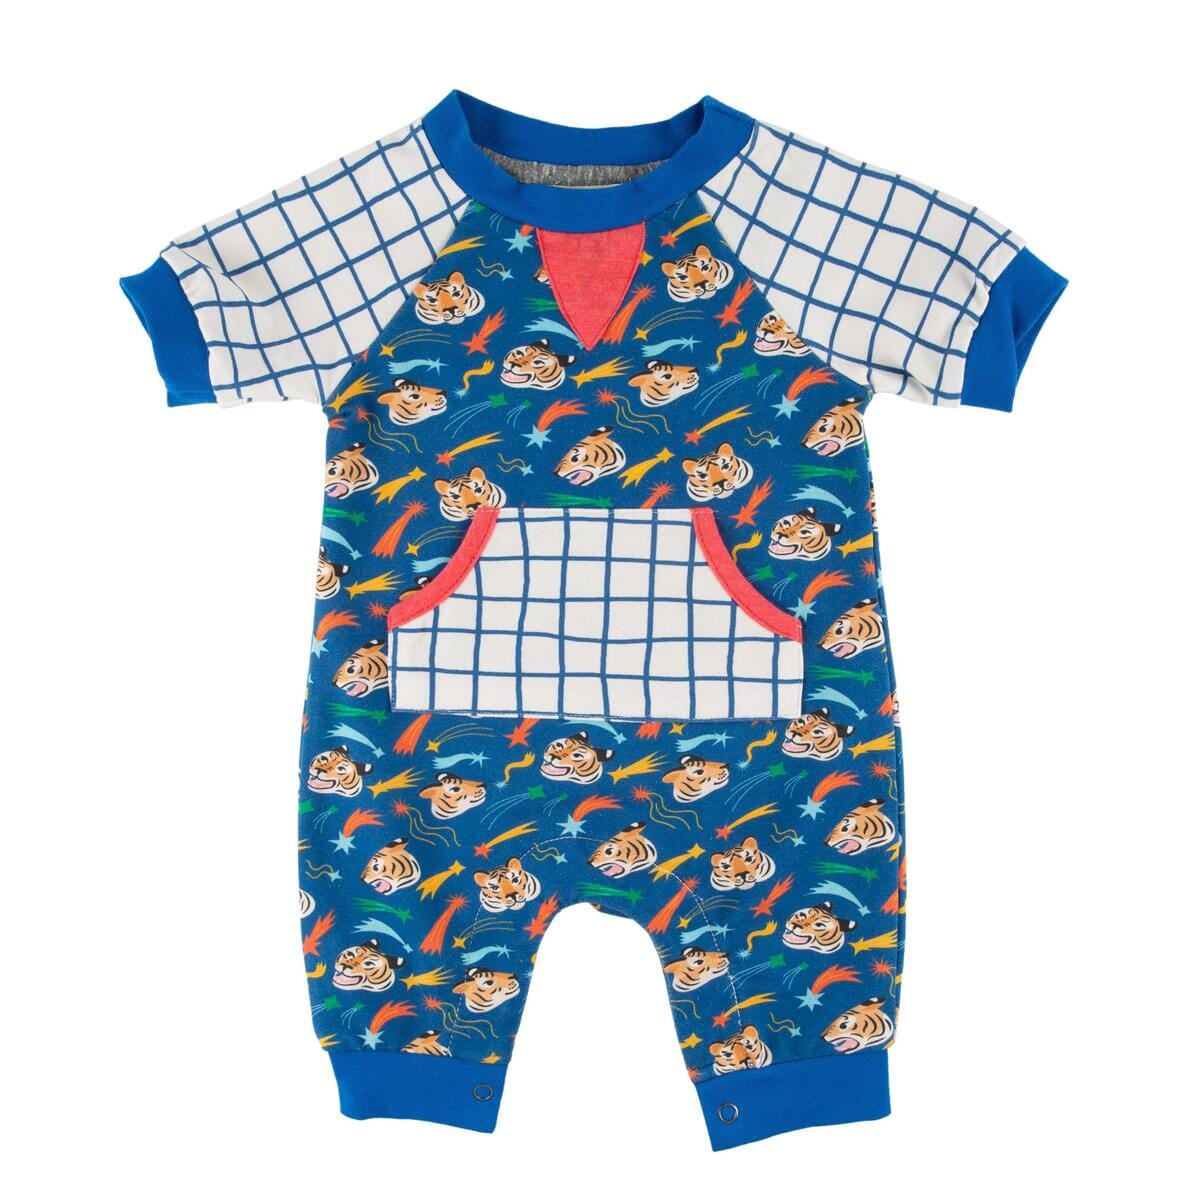 Wild Thing Henry Romper 130 BABY BOYS/NEUTRAL APPAREL Miki Miette 3m 